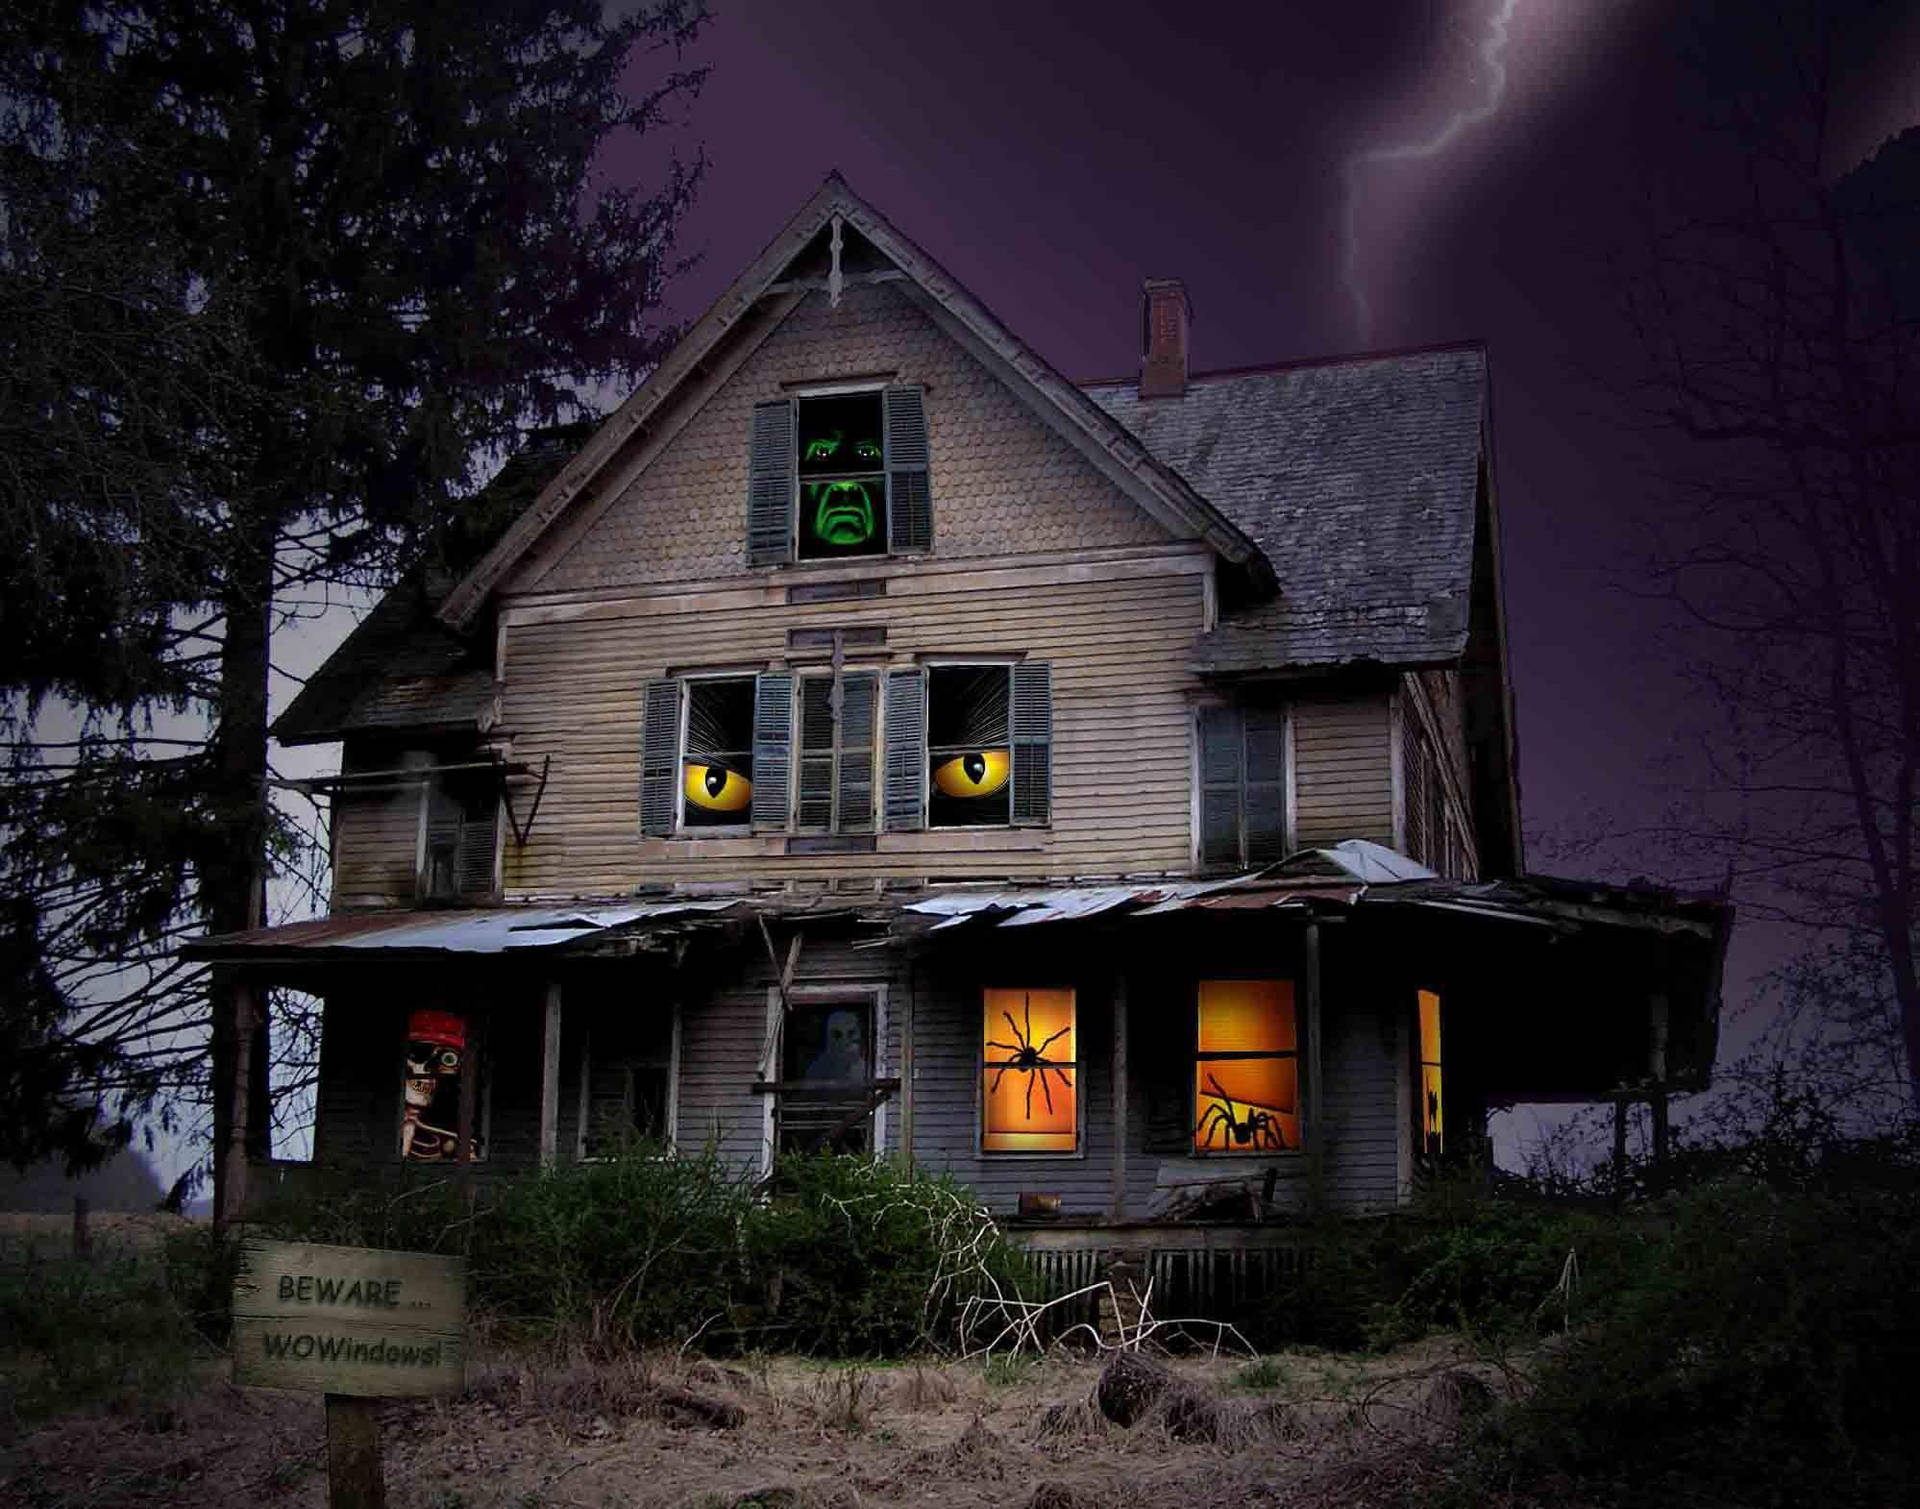 Get ready for a spooky Halloween this year at a Haunted House! Wallpaper